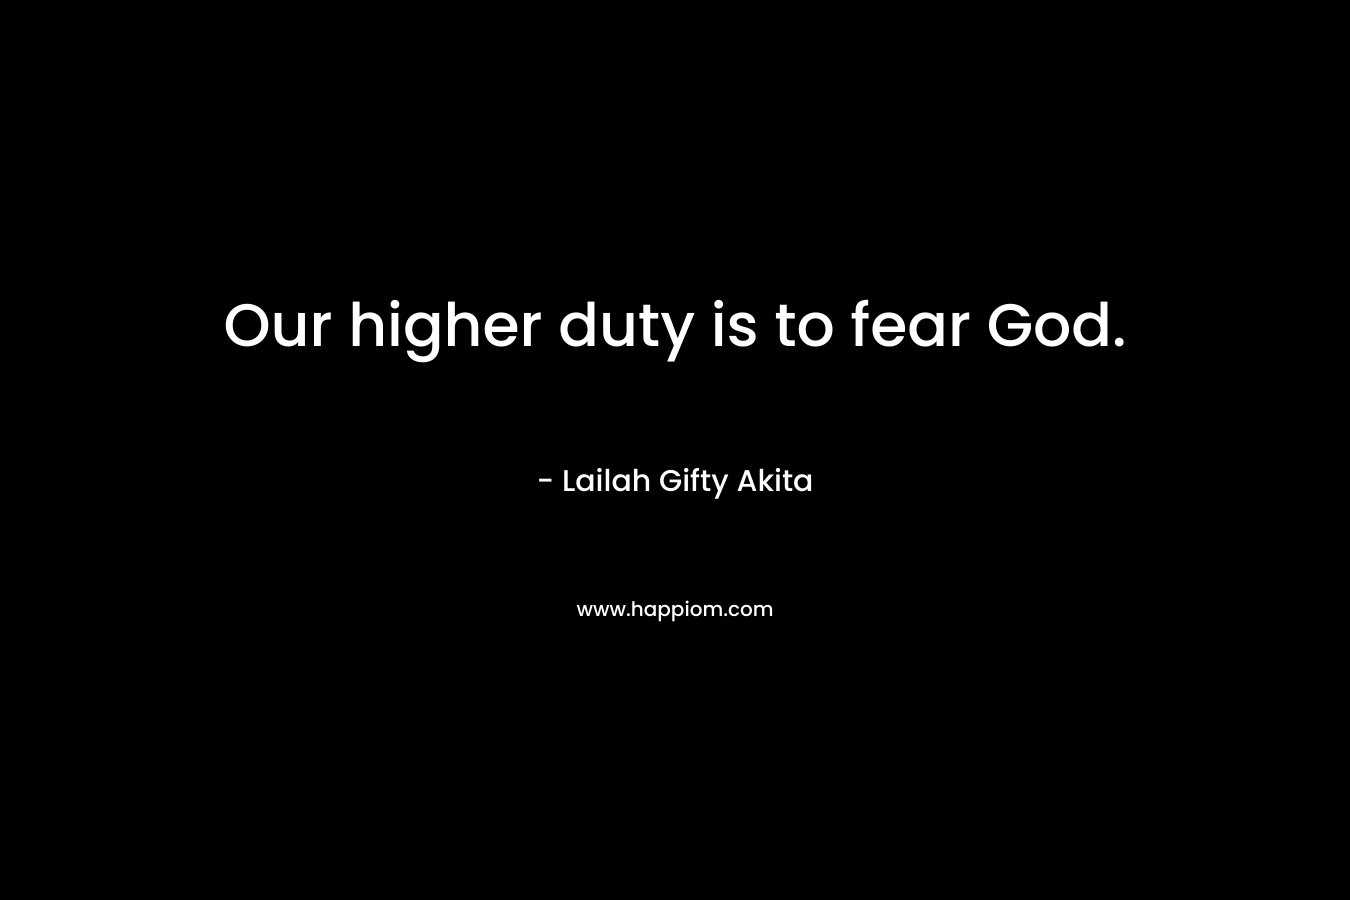 Our higher duty is to fear God.